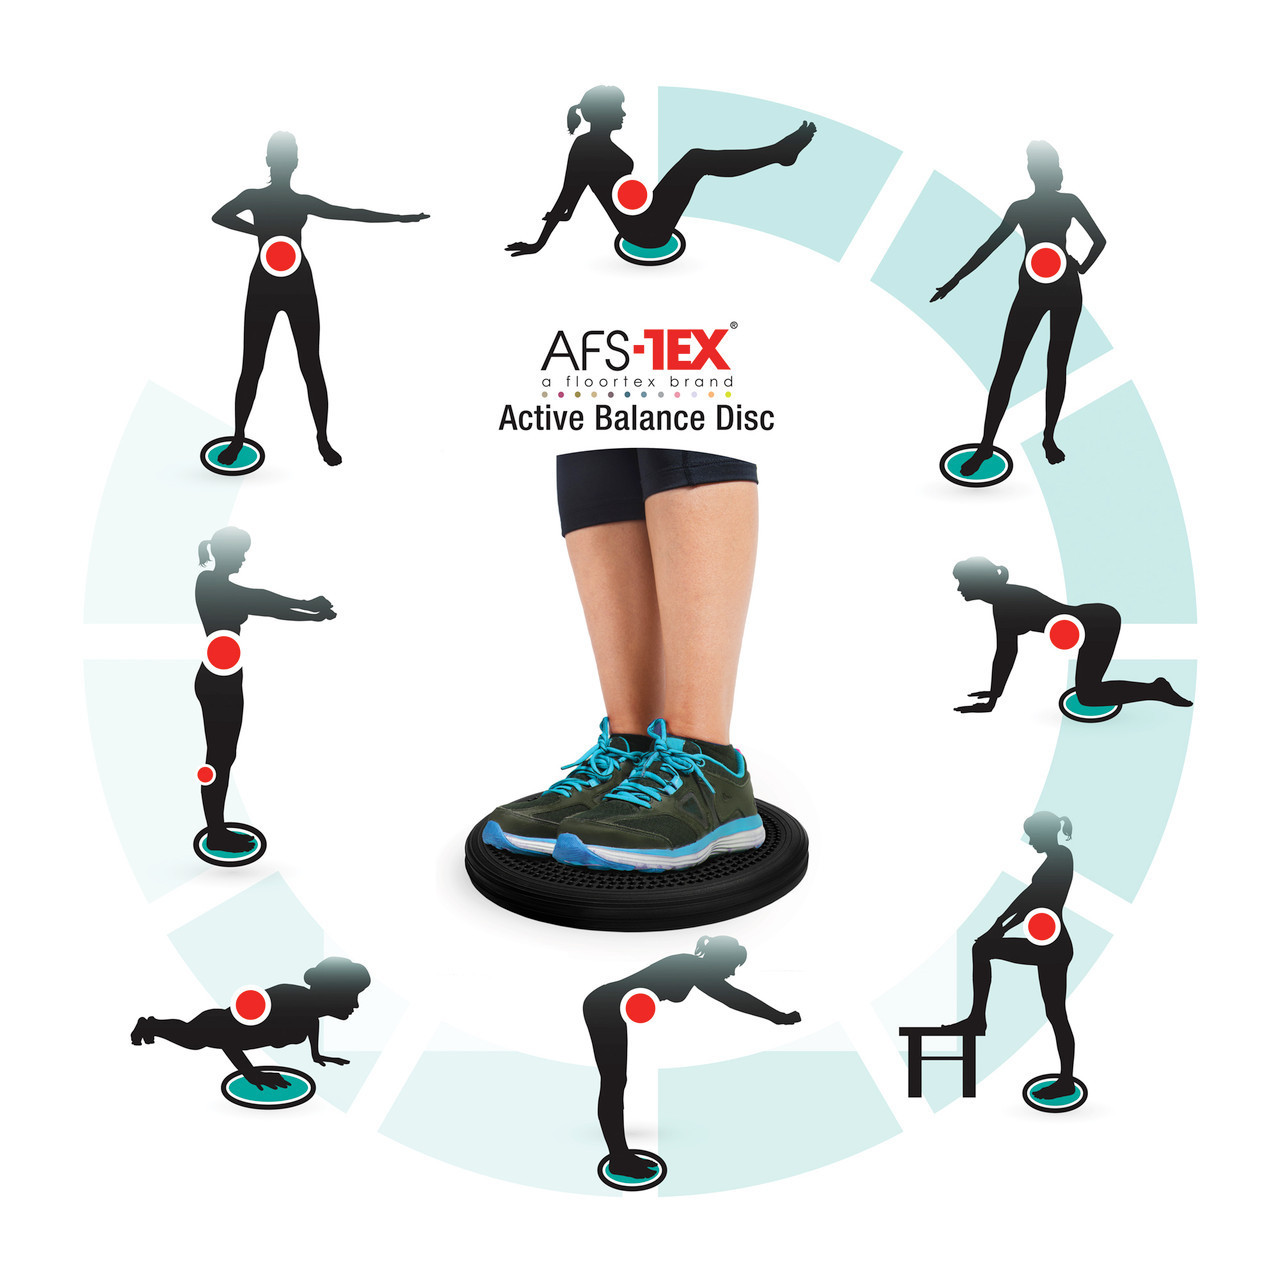 Using a Balance Disc for Exercise and Active Sitting